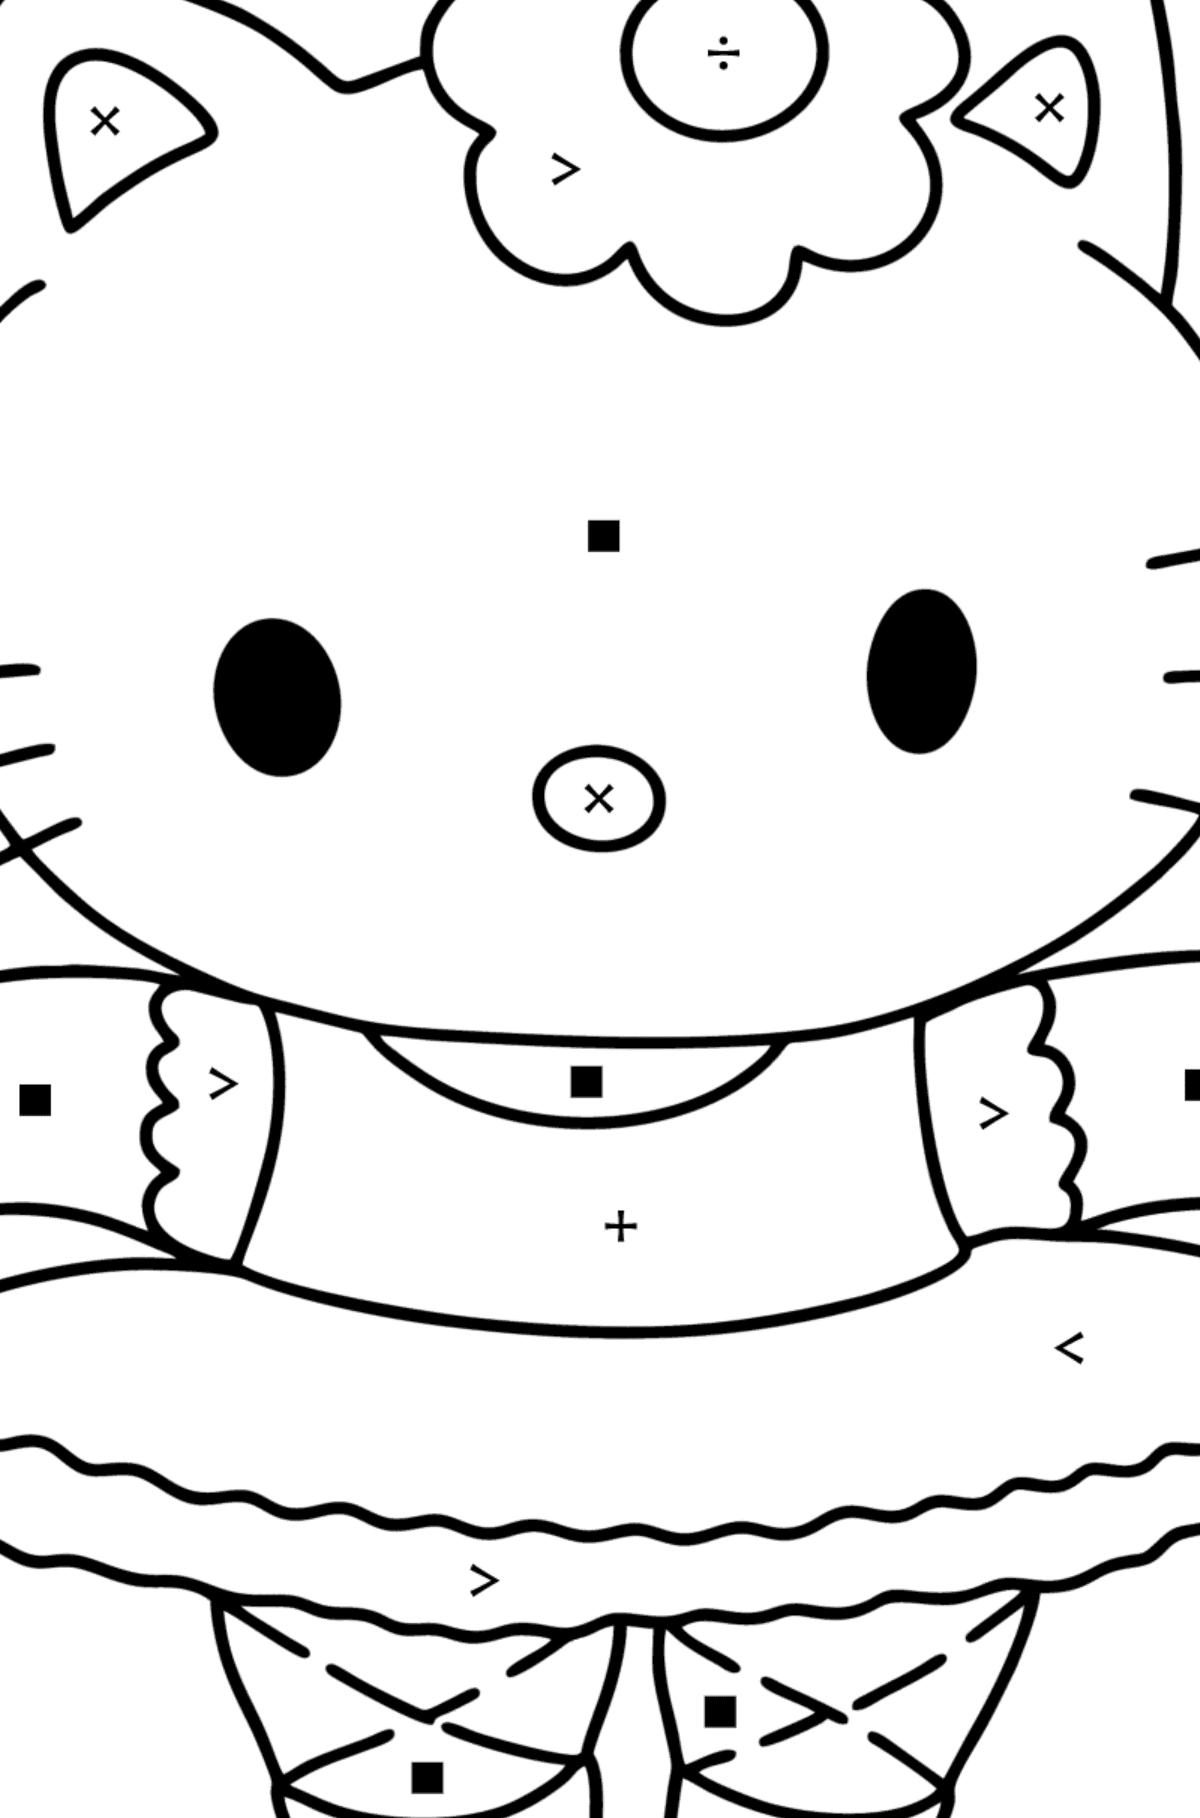 Hello Kitty Ballerina coloring page - Coloring by Symbols for Kids